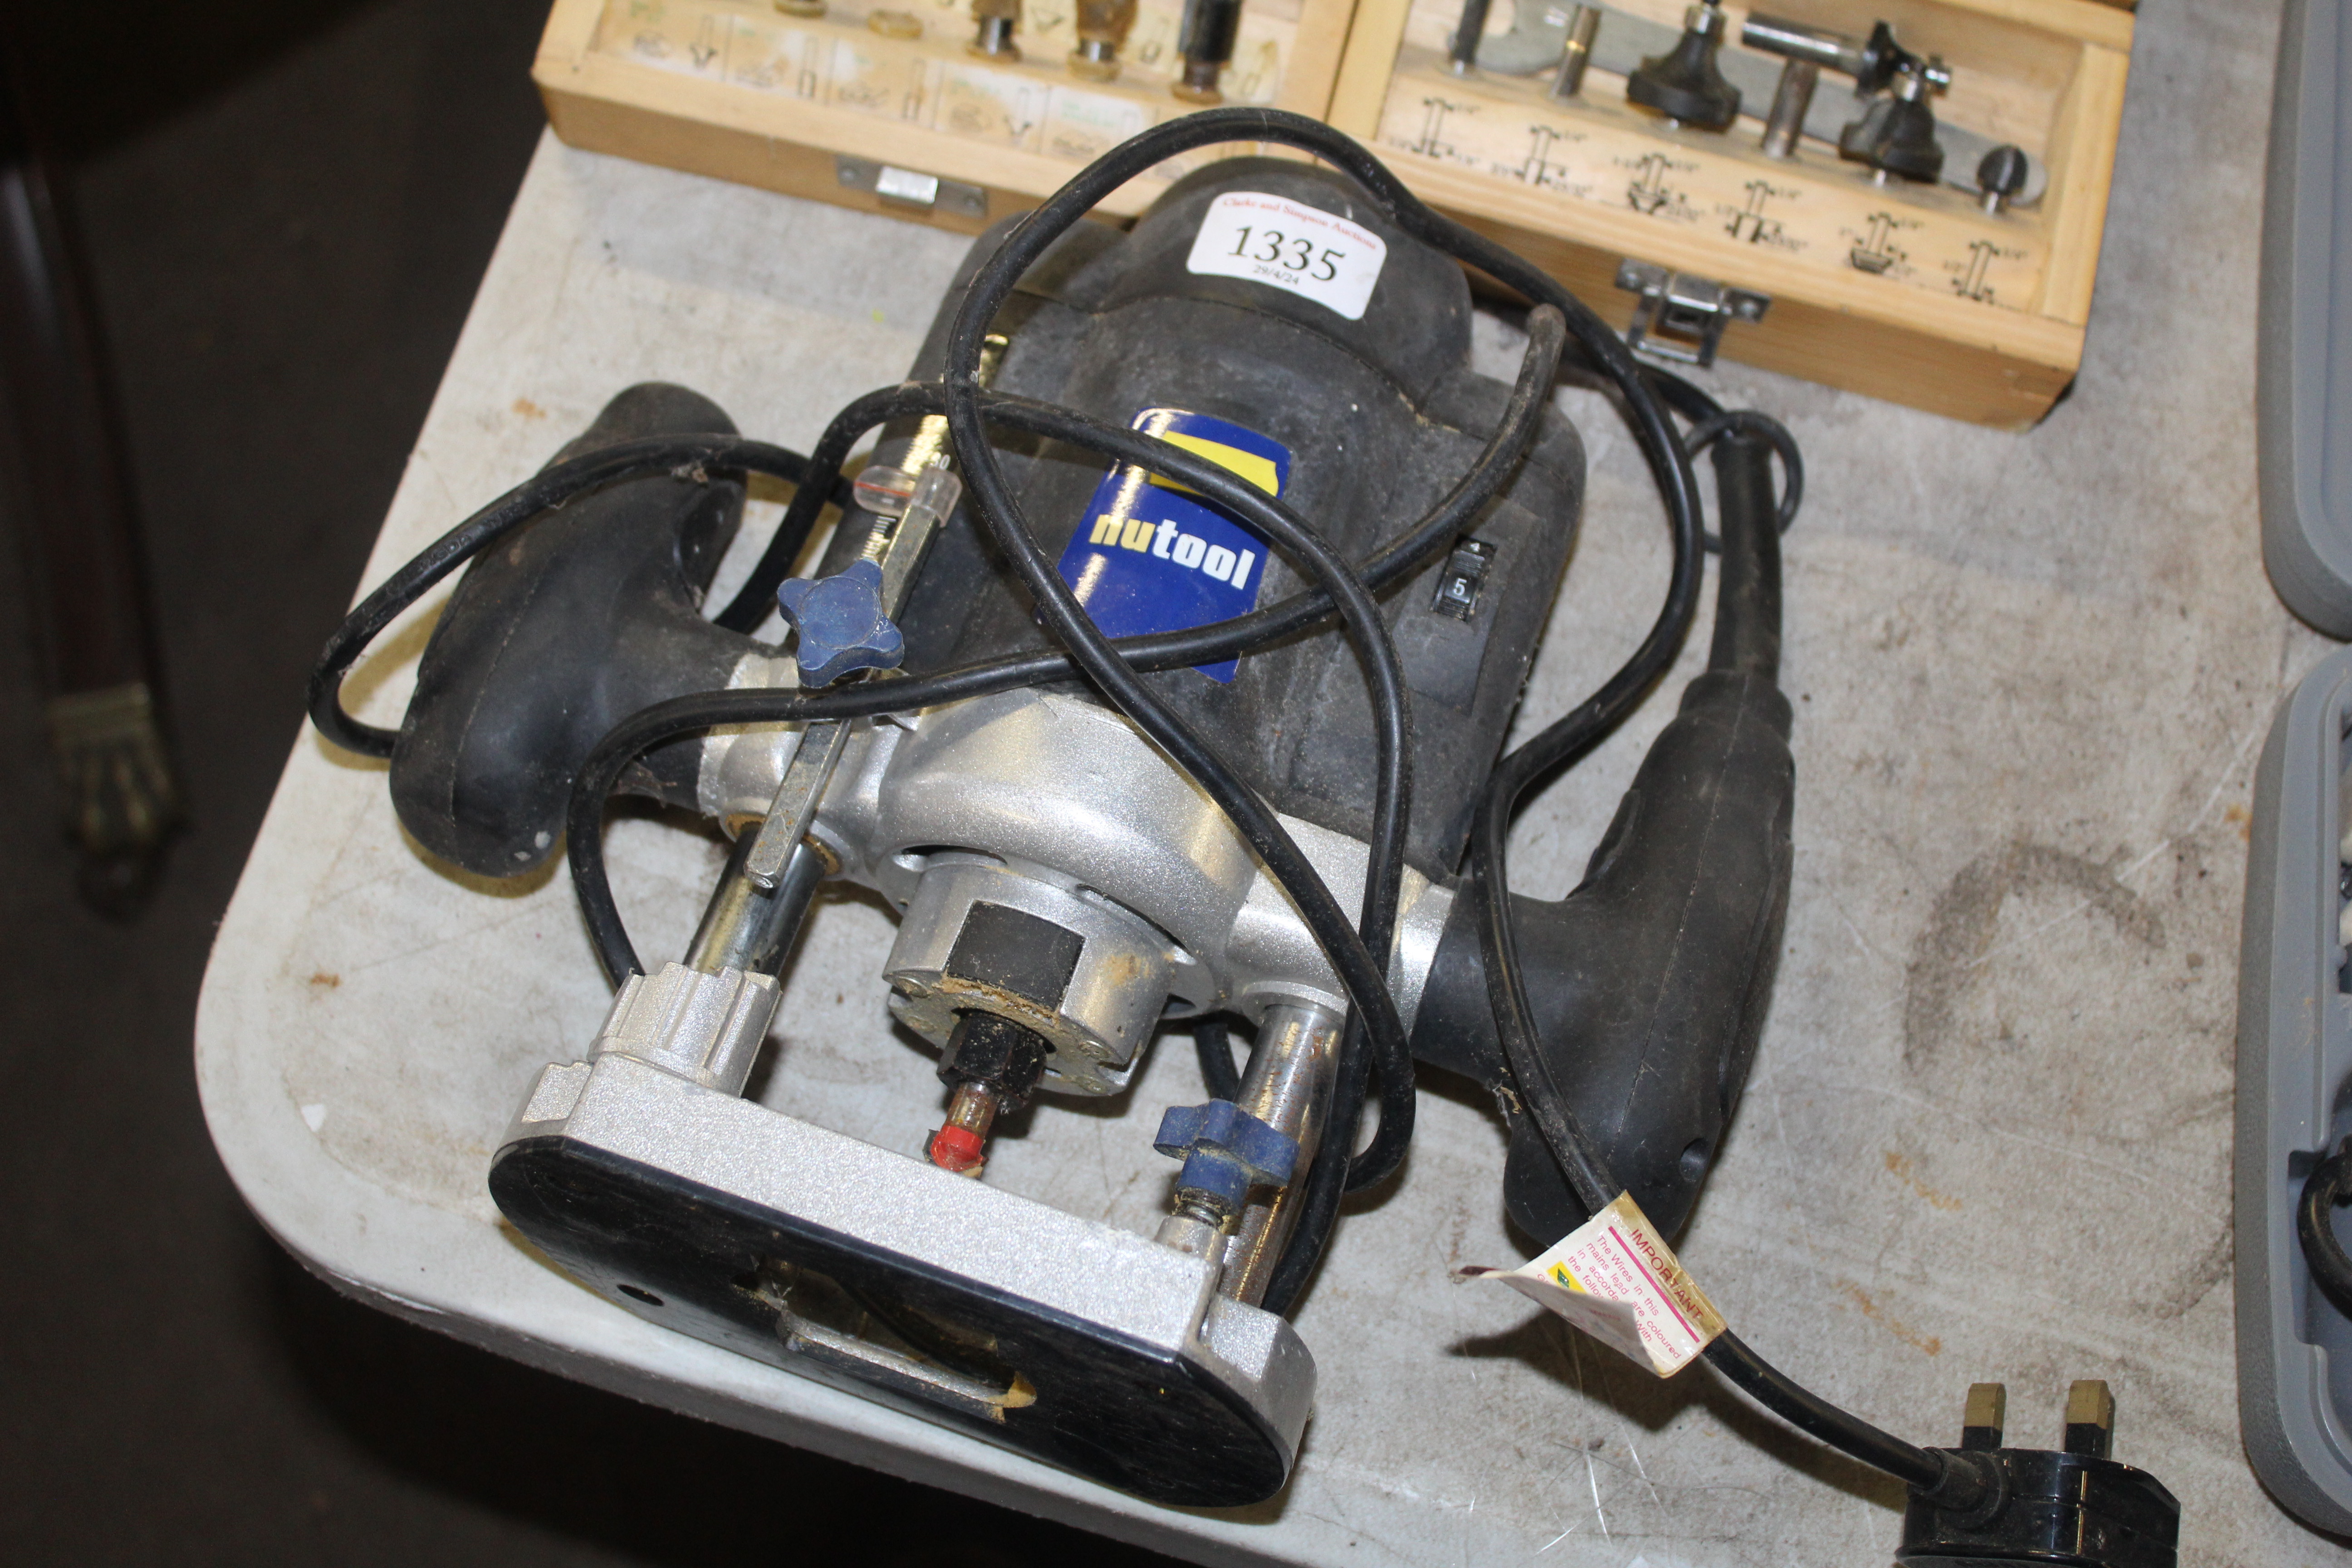 A Nutool MTPC1200AT 240v electric router together - Image 2 of 3